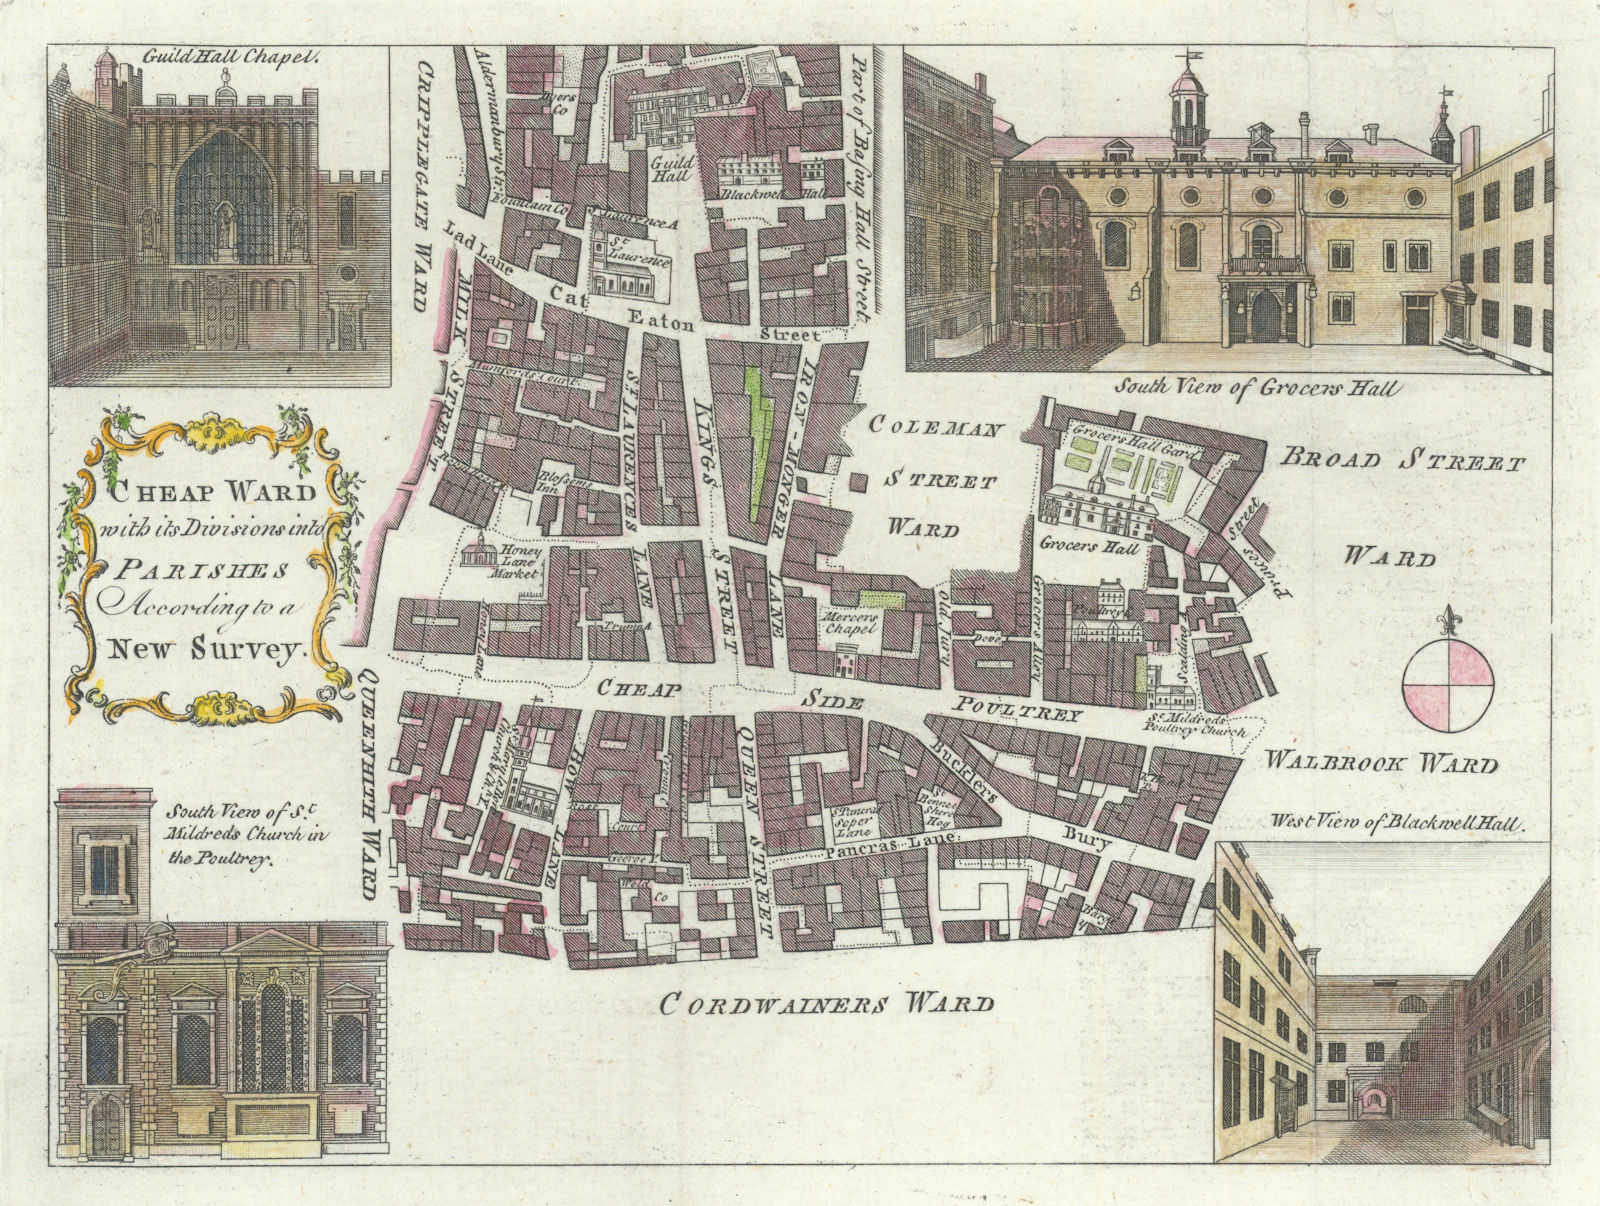 Associate Product Cheap Ward. City of London. Cheapside Poultry Gresham St. BOWEN c1772 old map